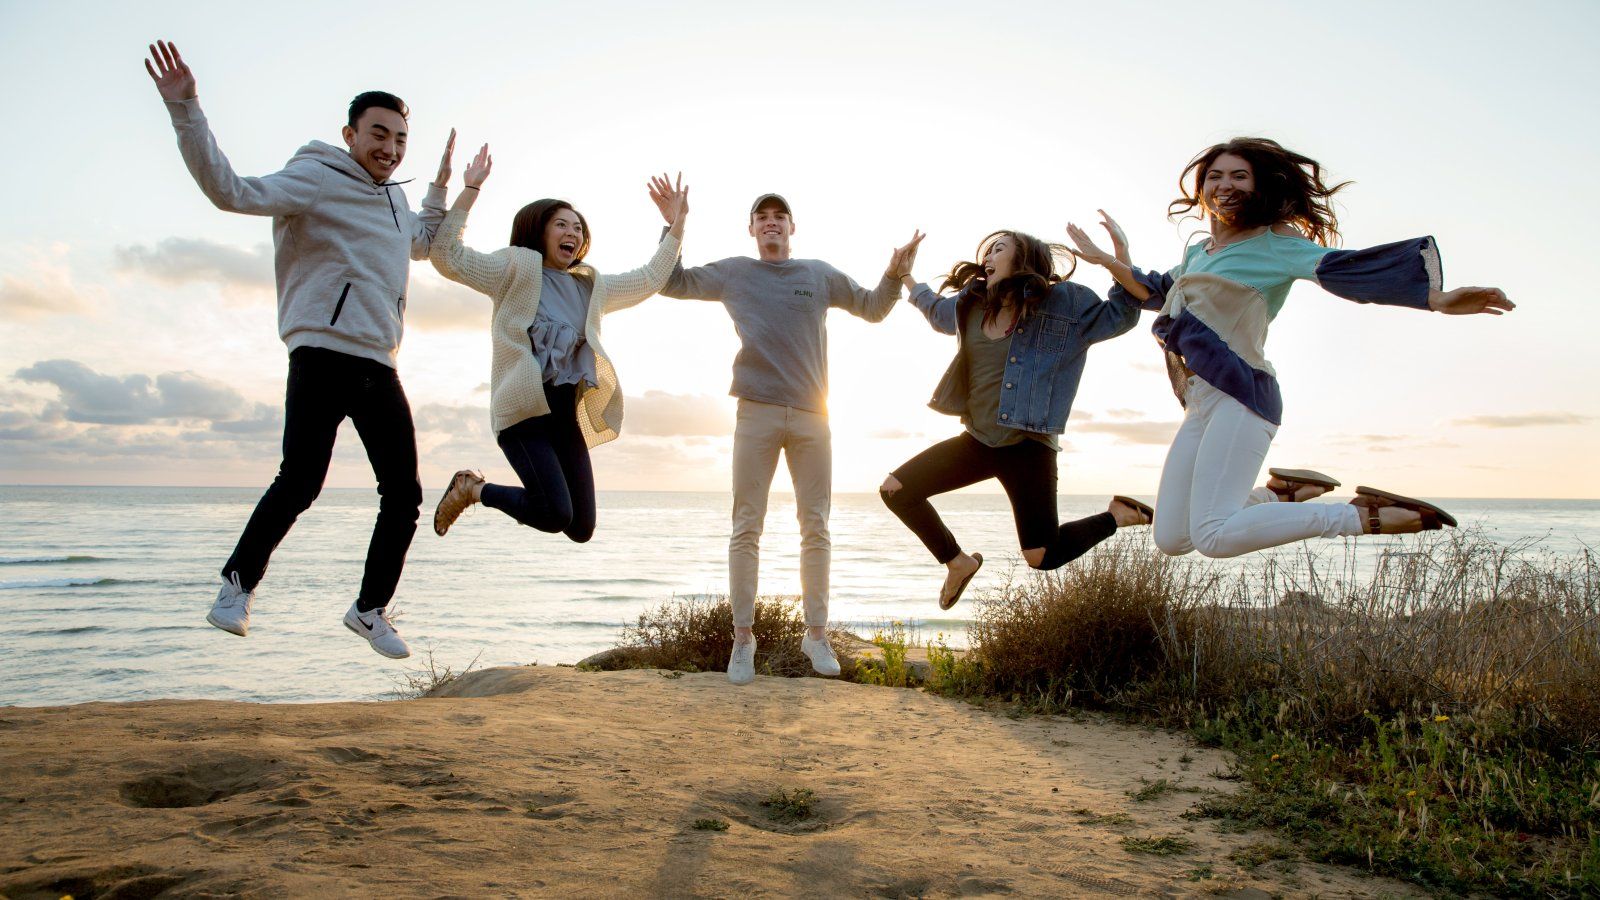 Small group of students jump in air with sunset and ocean behind them